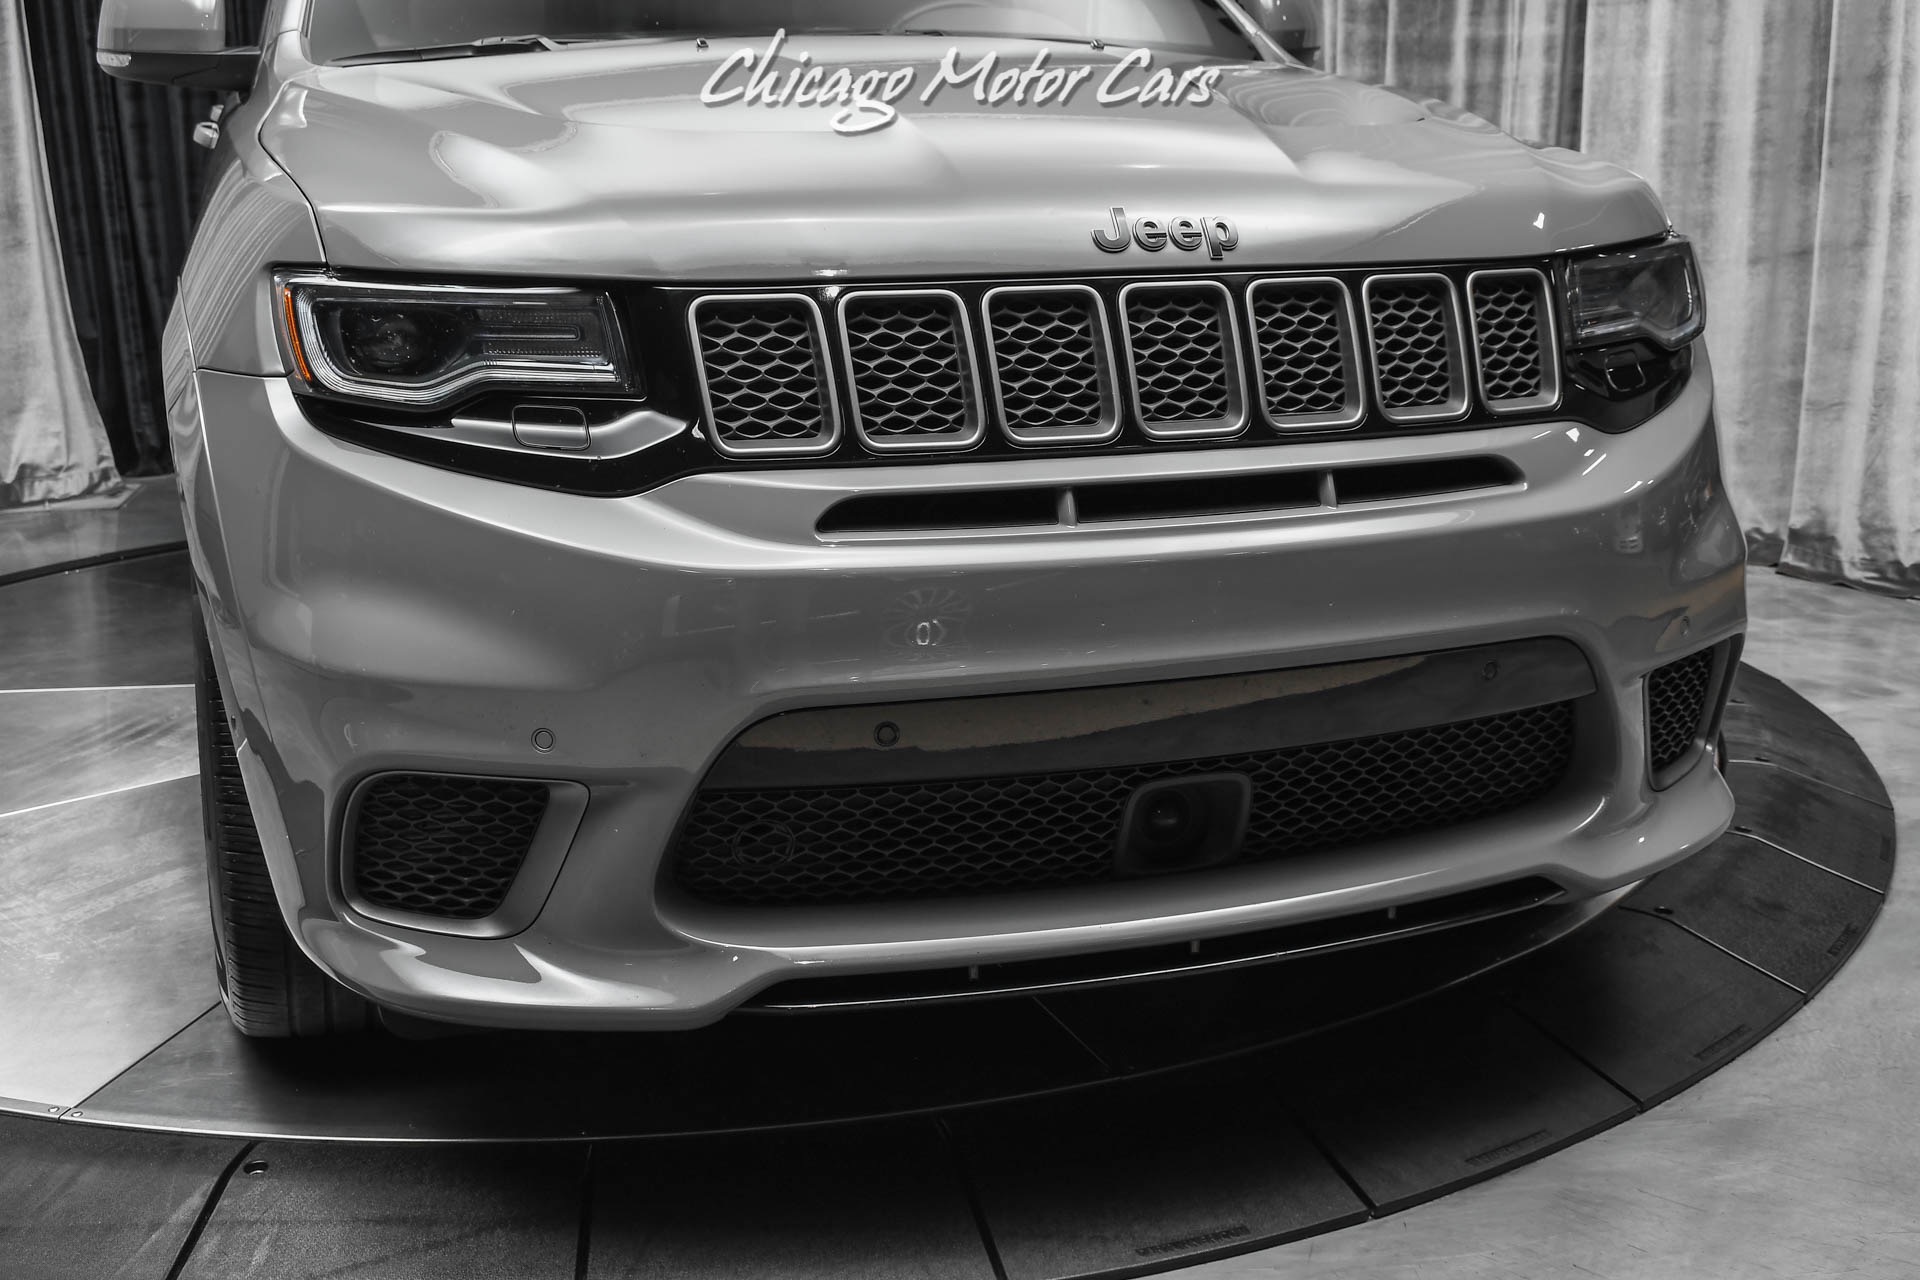 Used-2020-Jeep-Grand-Cherokee-Trackhawk-Dual-Pane-Sunroof-ProTech-Package-707-Horsepower